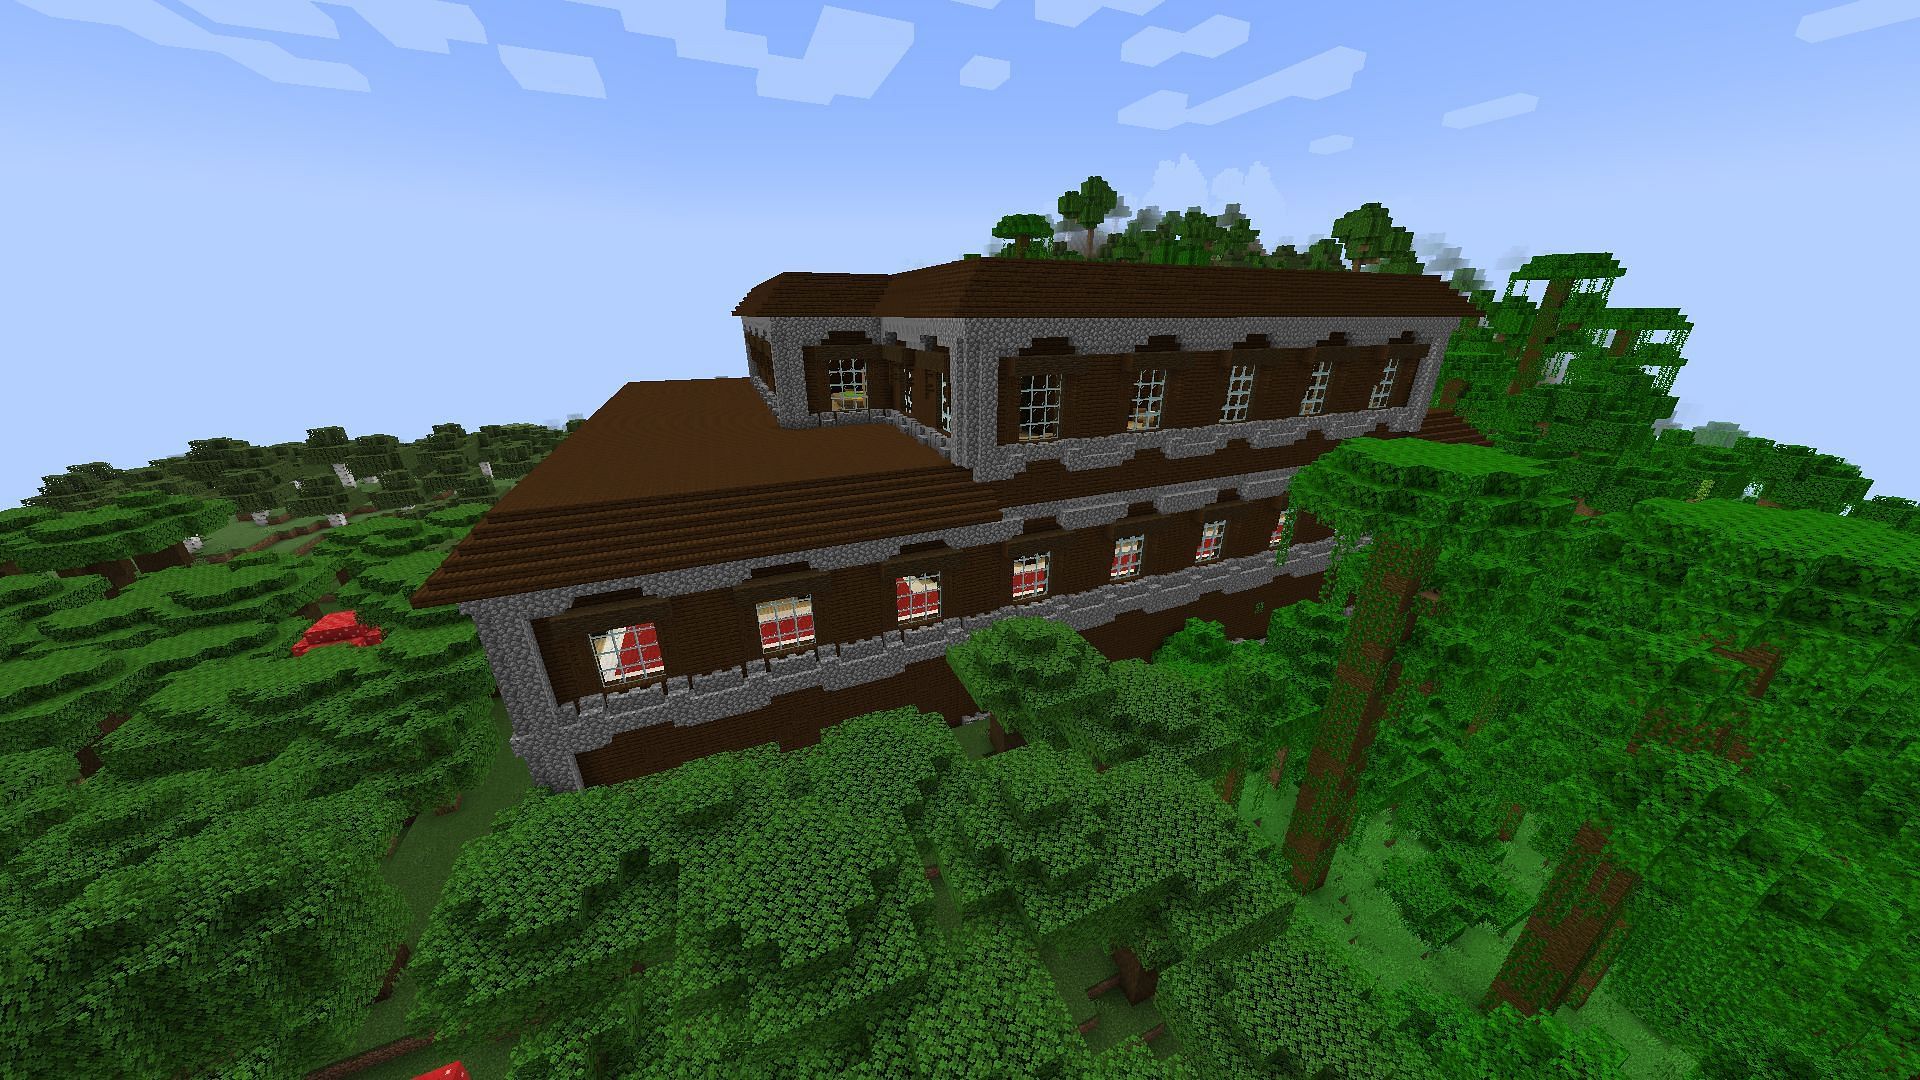 Woodland Mansion is one of the rarest structures in Minecraft (Image via Mojang)